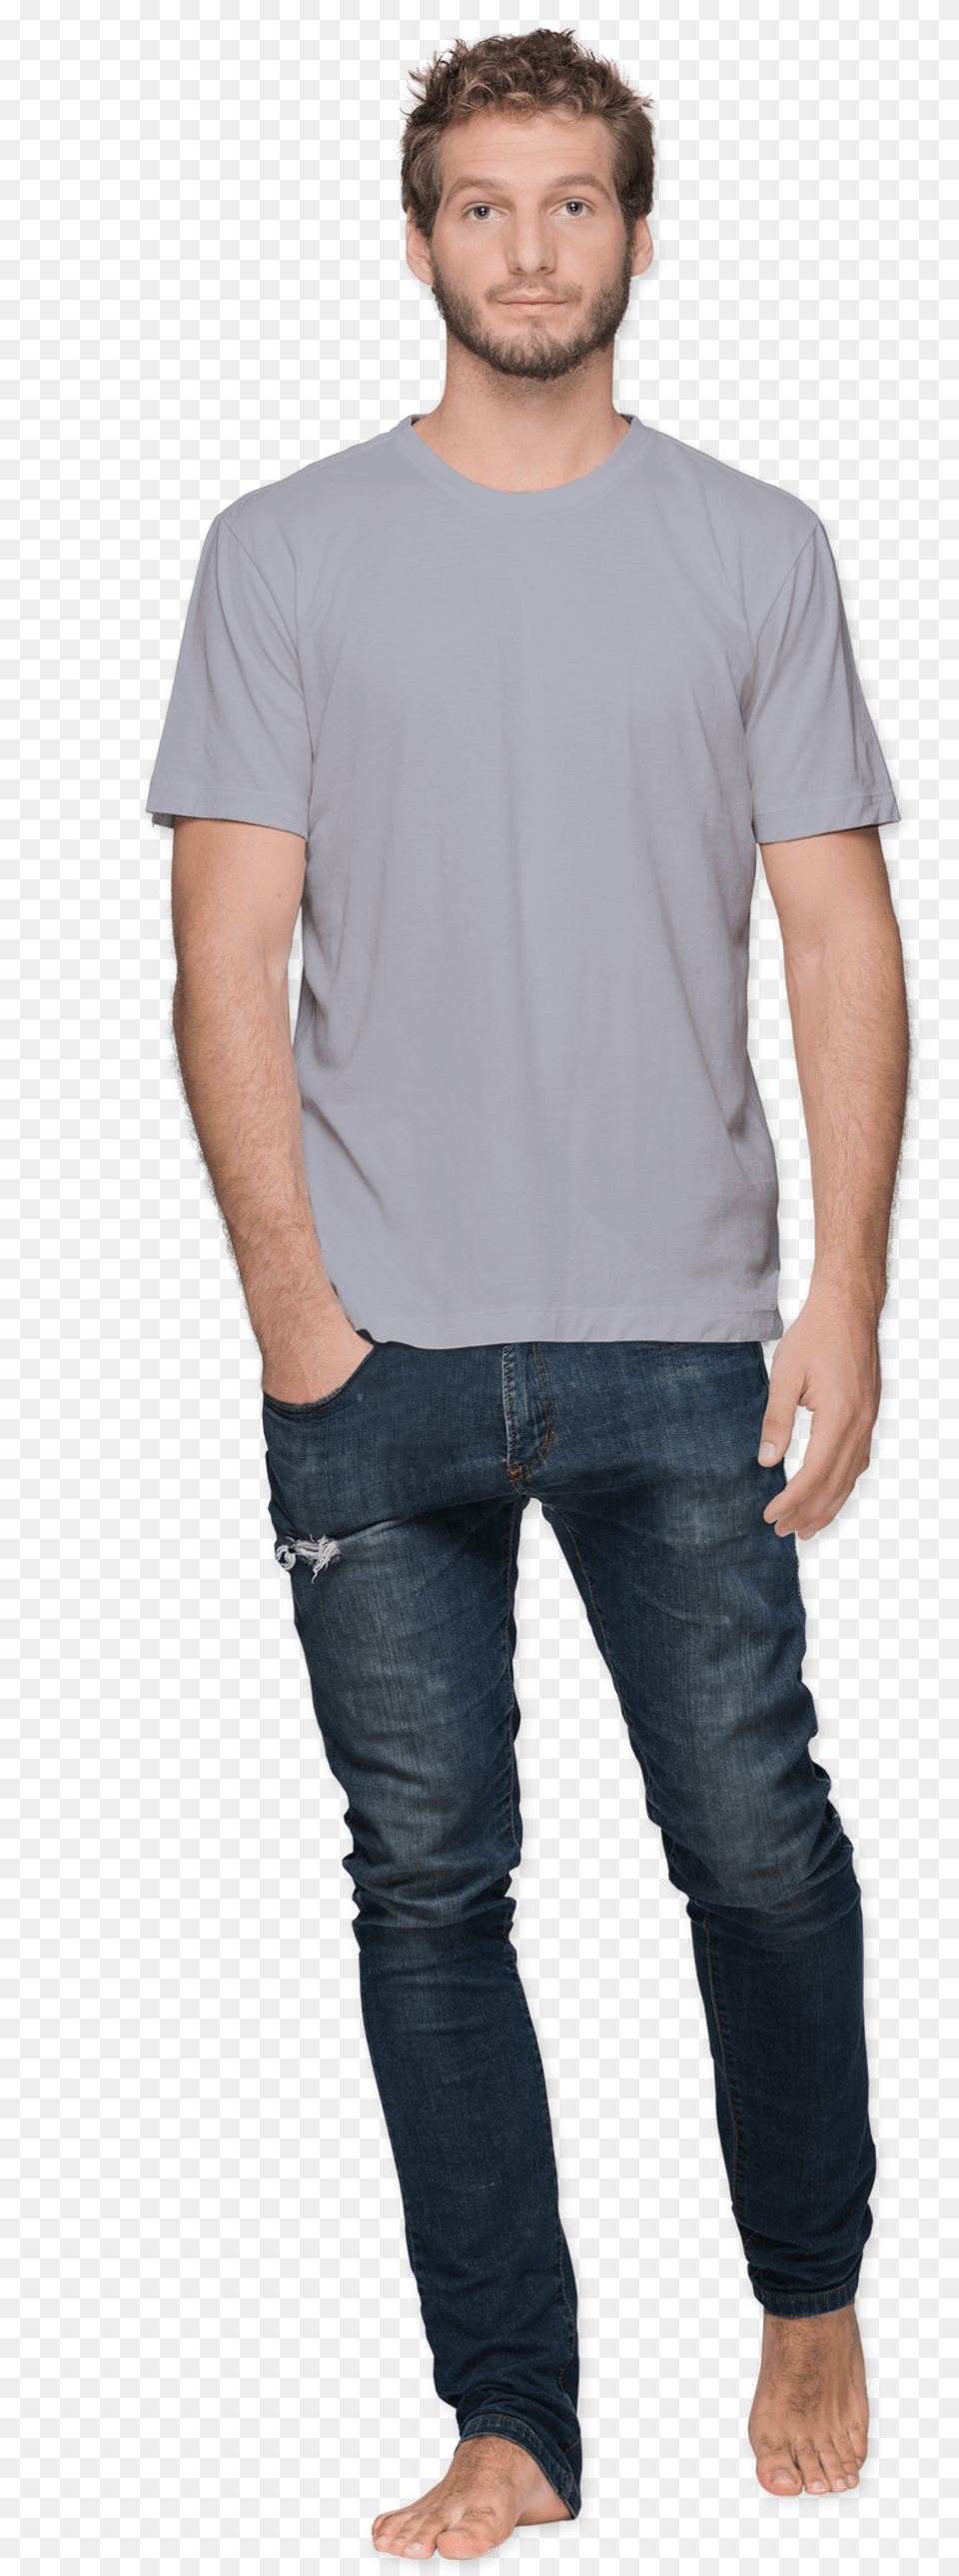 Jeans Men T Shirt, T-shirt, Clothing, Standing, Person Png